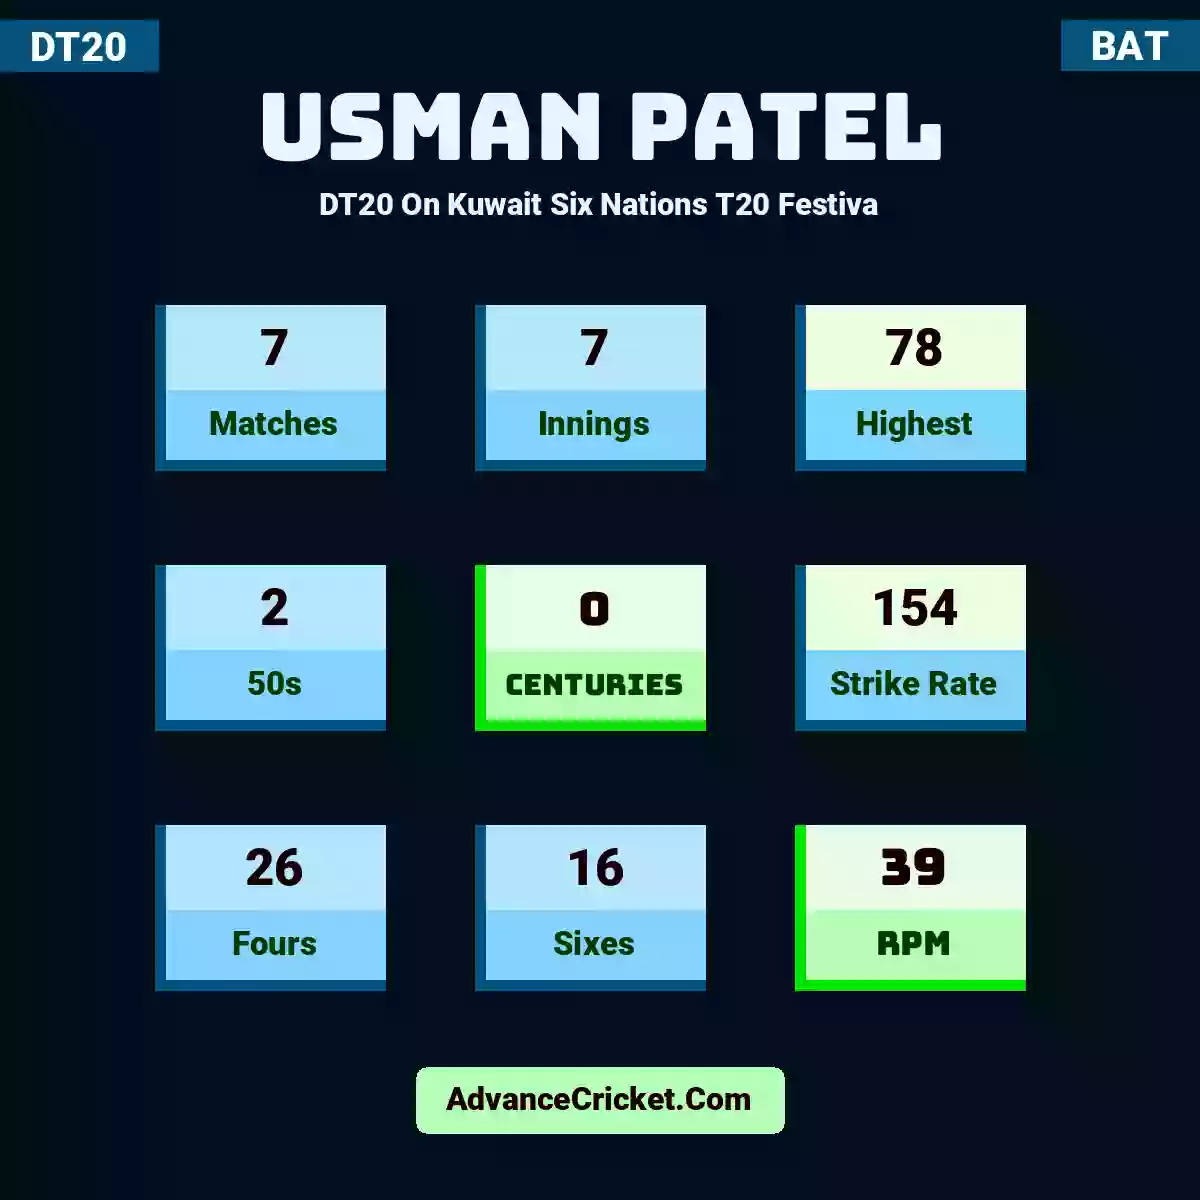 Usman Patel DT20  On Kuwait Six Nations T20 Festiva, Usman Patel played 7 matches, scored 78 runs as highest, 2 half-centuries, and 0 centuries, with a strike rate of 154. U.Patel hit 26 fours and 16 sixes, with an RPM of 39.